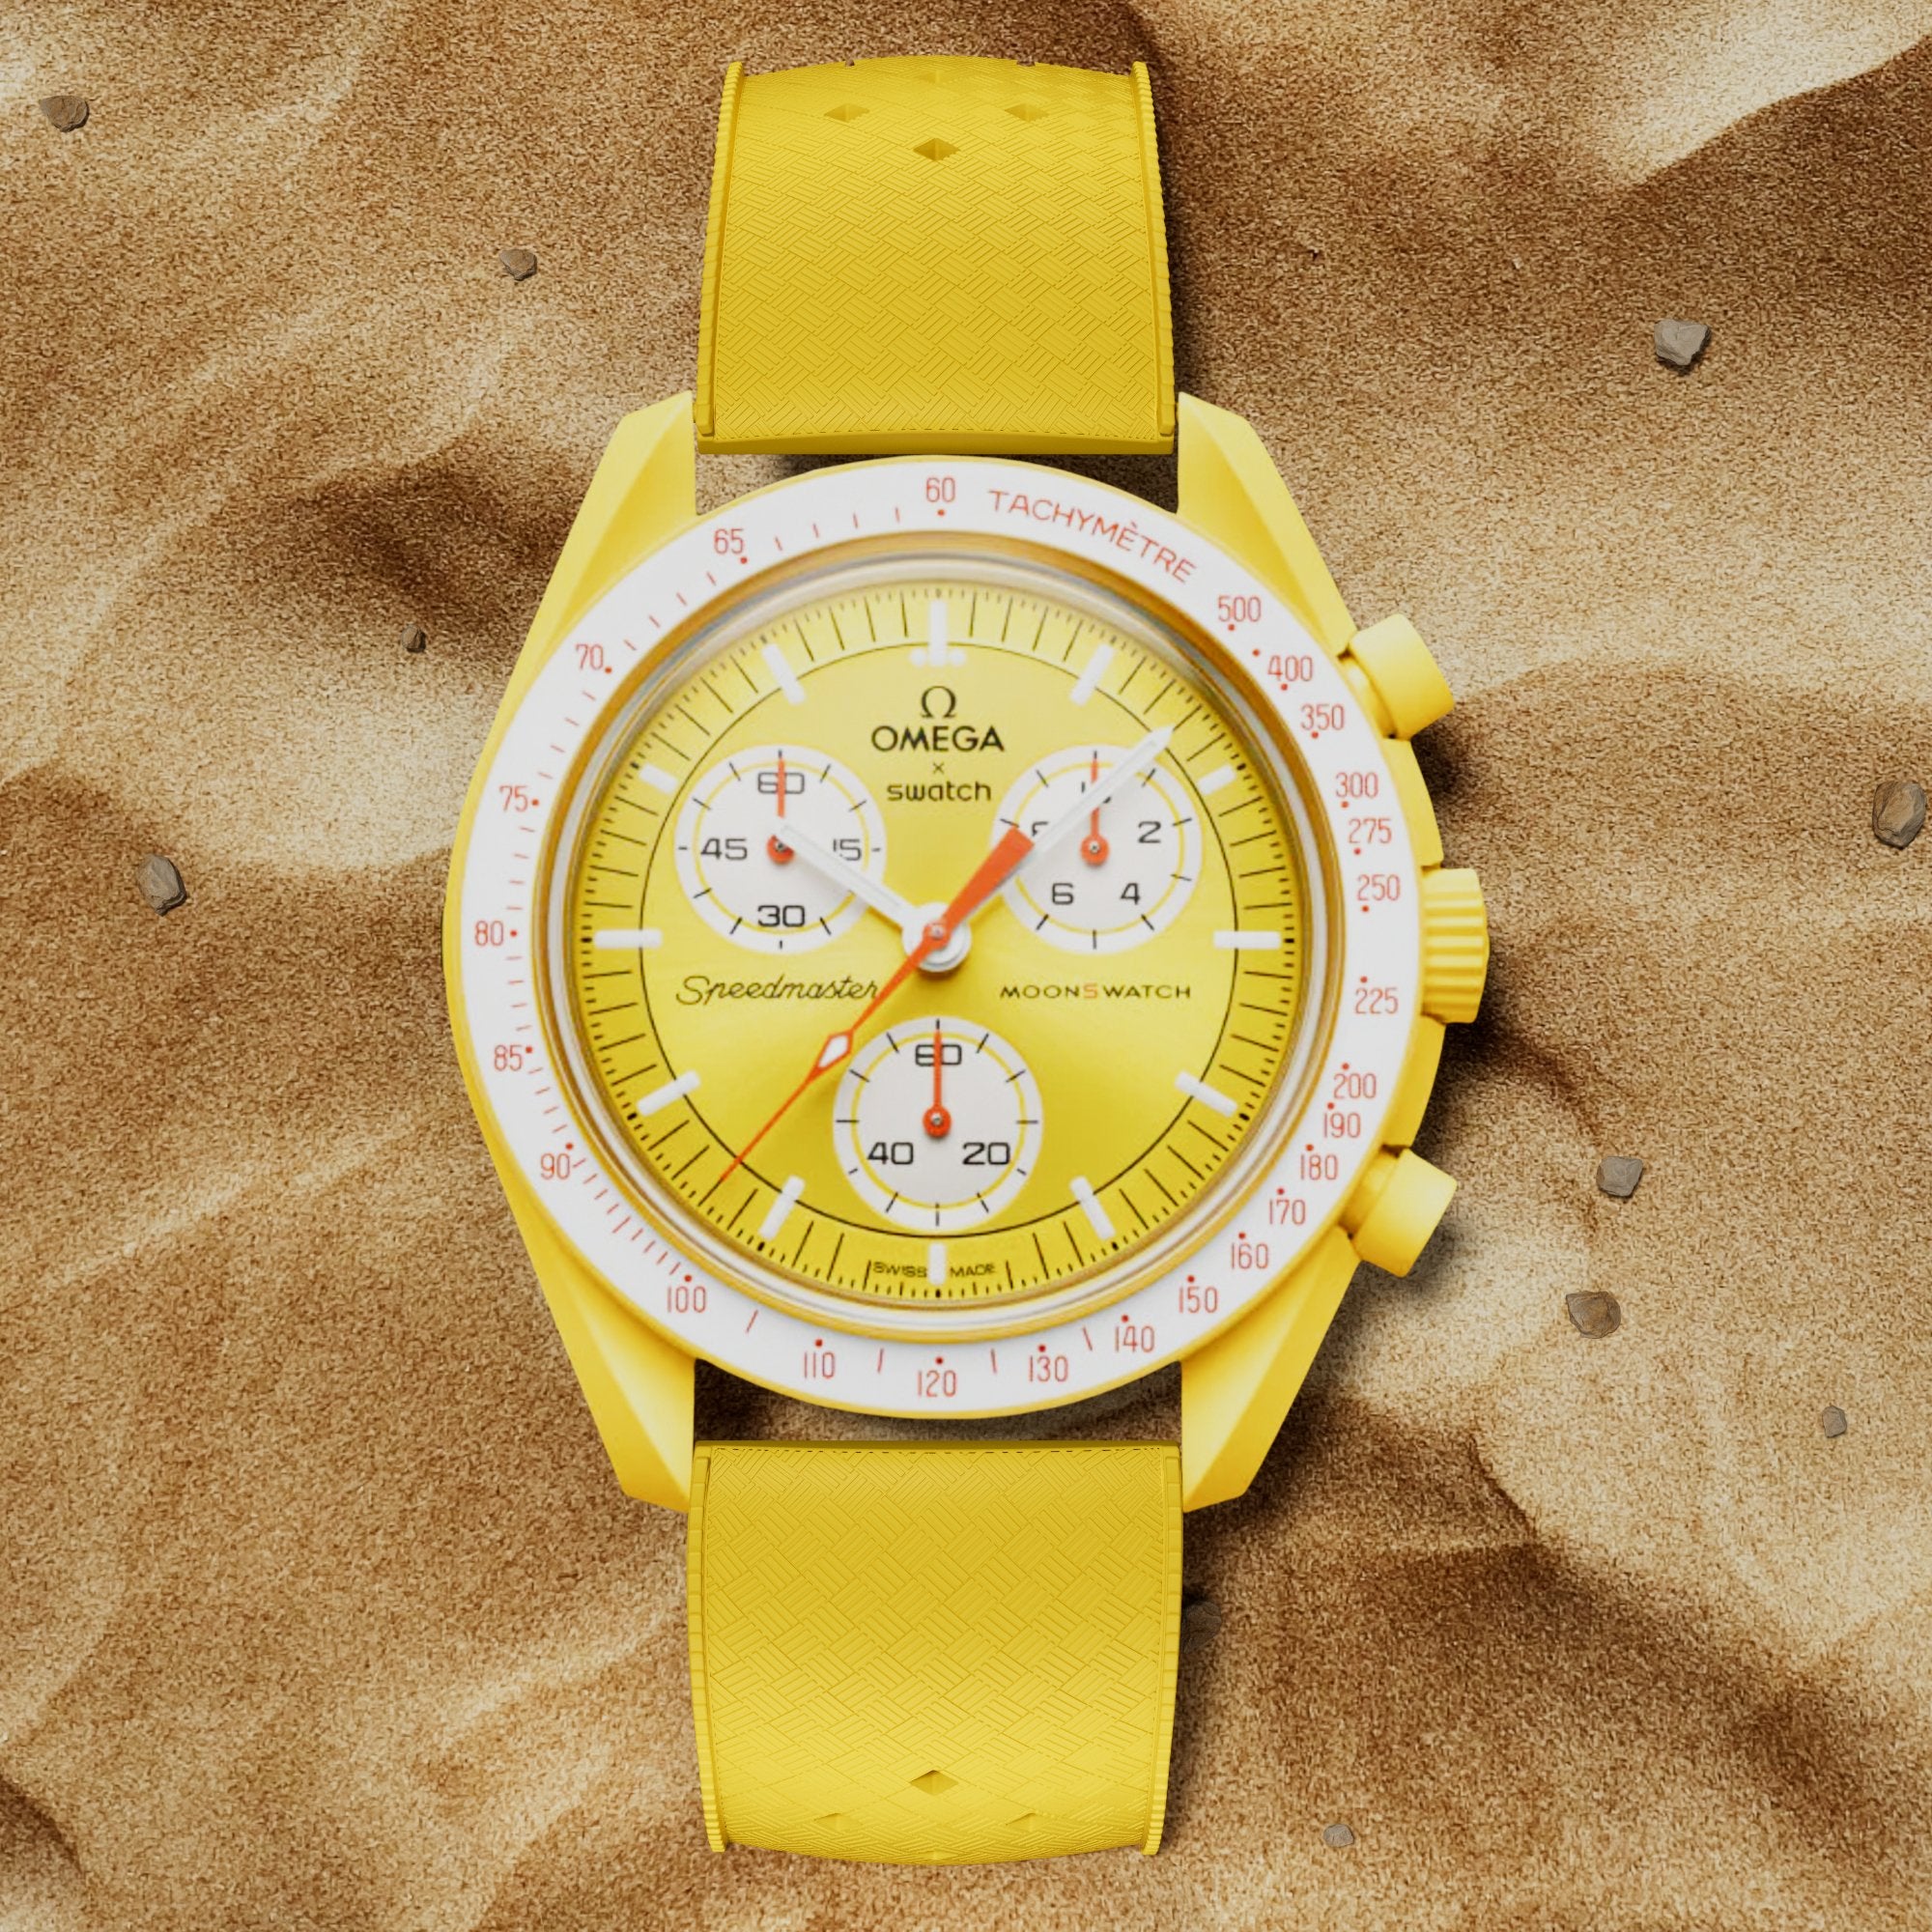 Calypso Tropical Style FKM Rubber Strap- Quick-Release-Compatible with Omega x Swatch - Yellow (2422) -Strapseeker